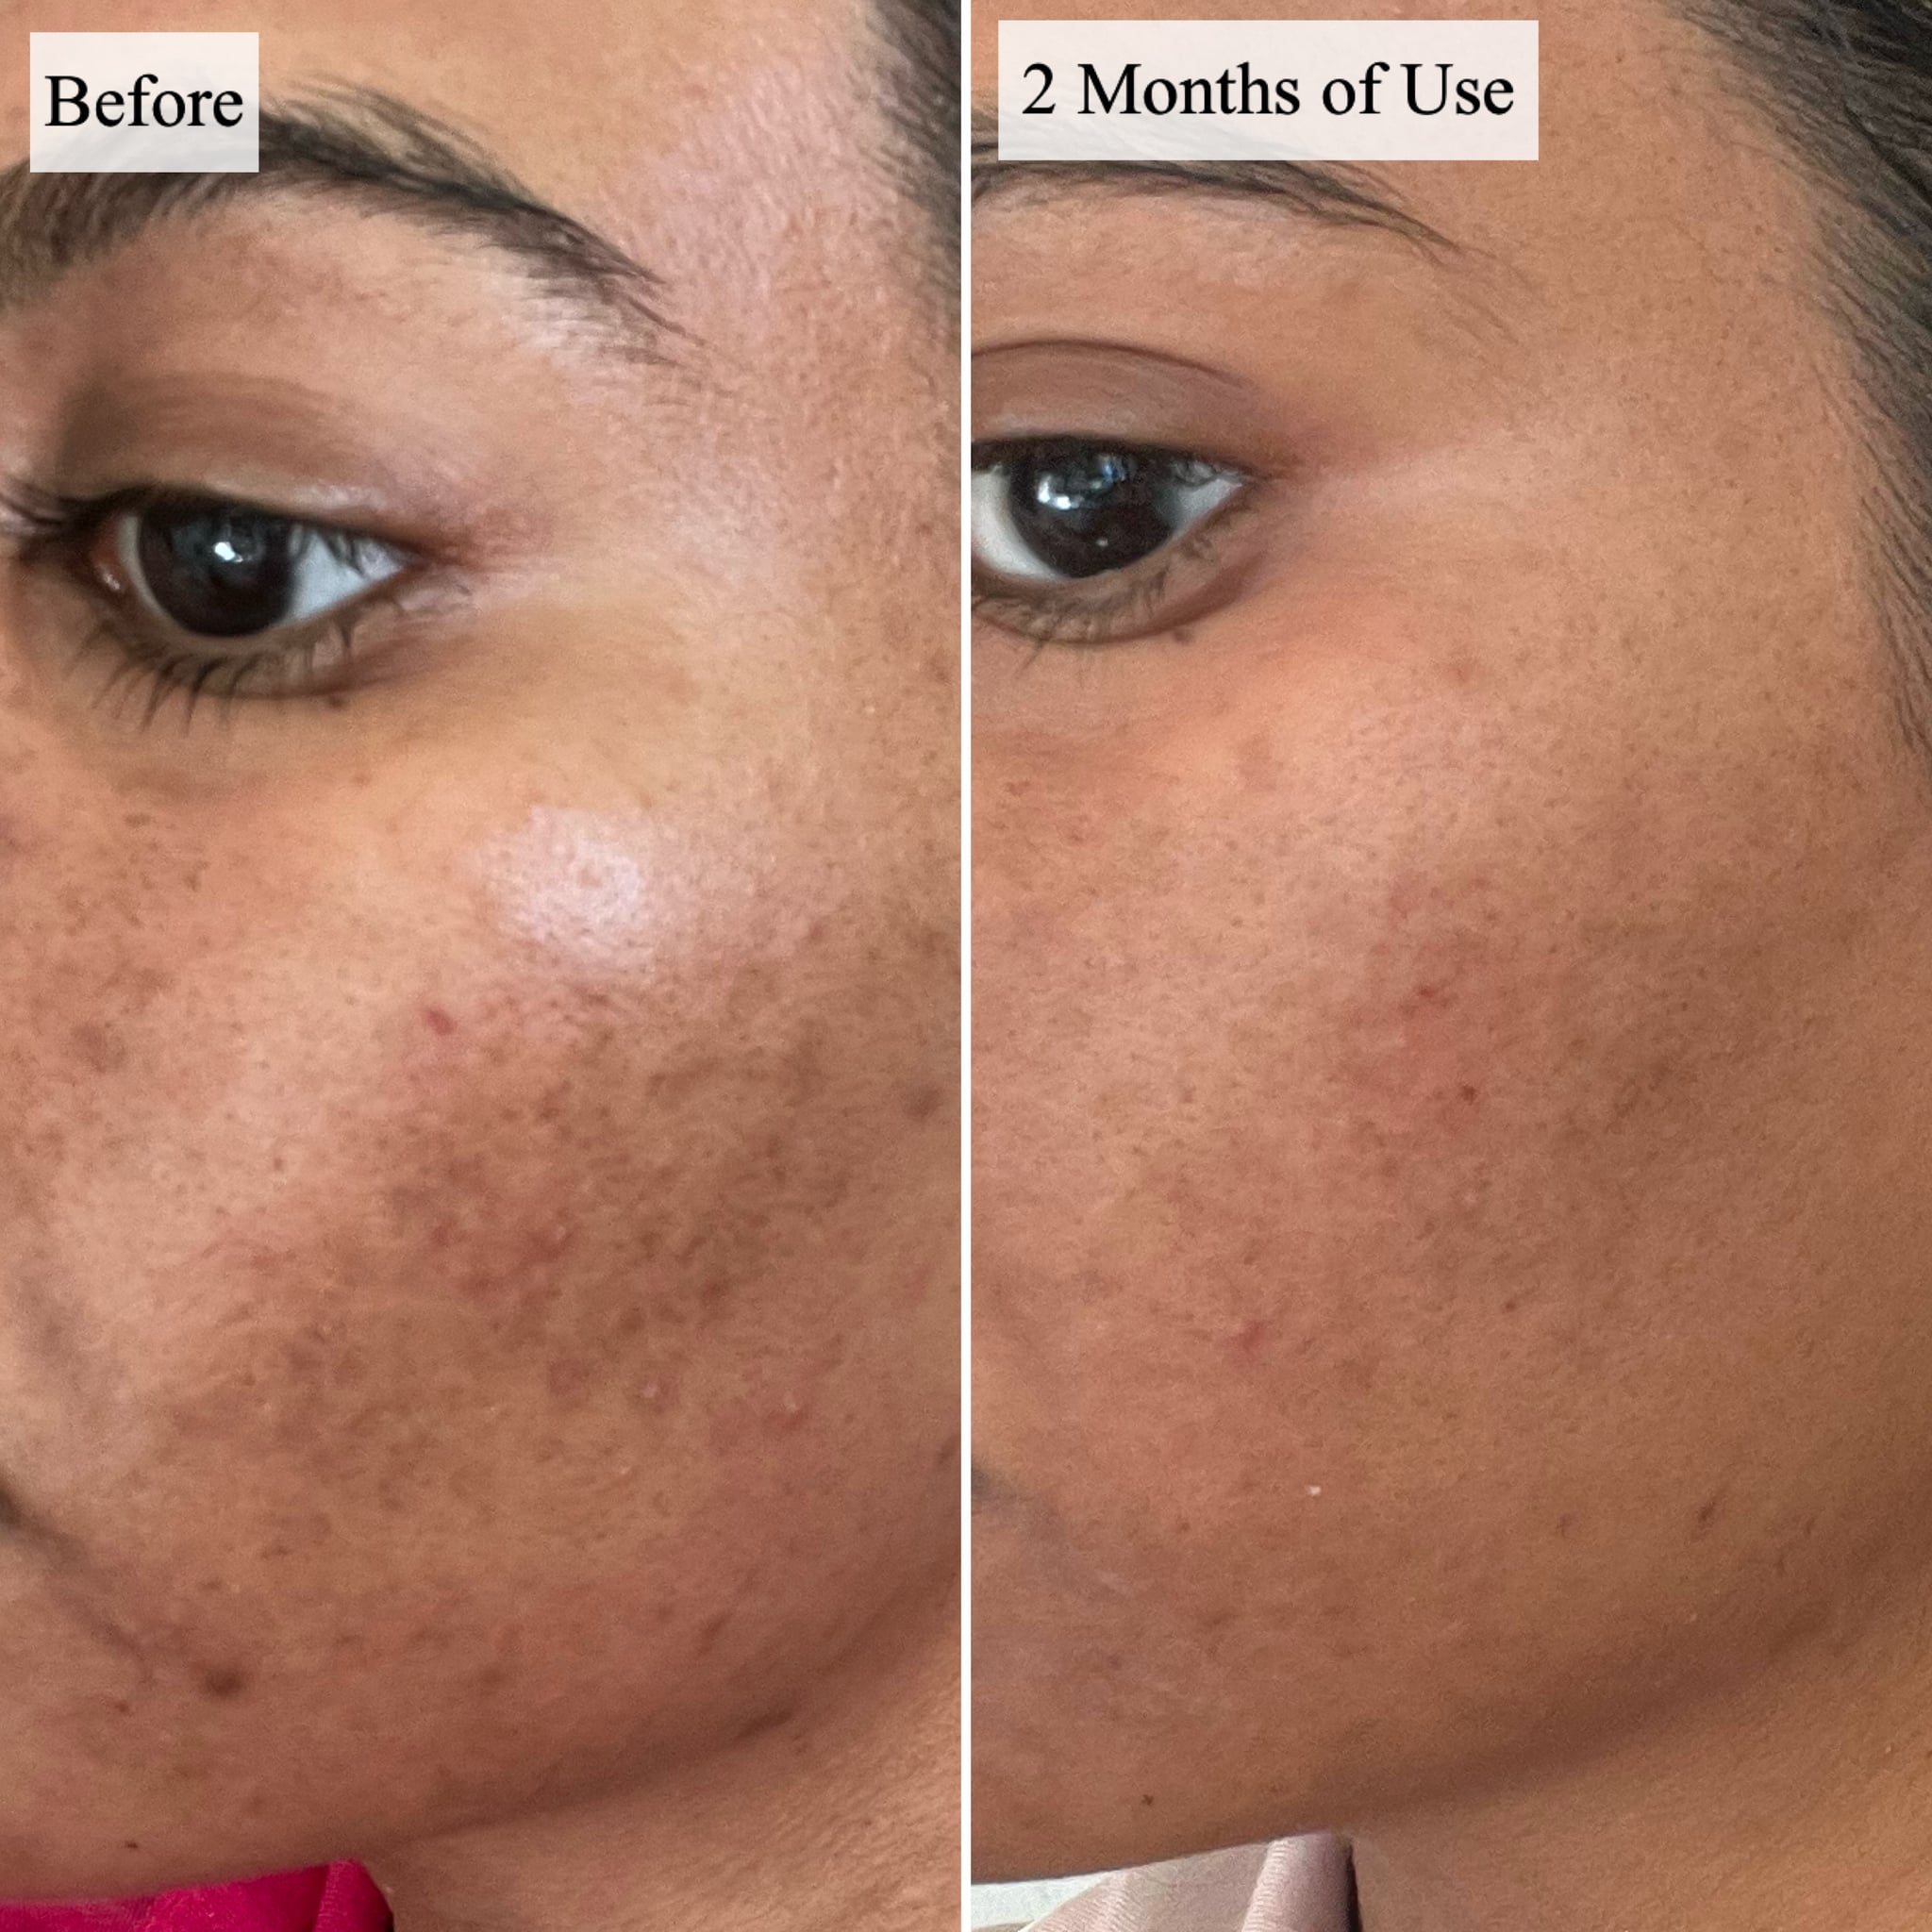 Before and after using the Caudalíe Vinoperfect Radiance Serum for two months.